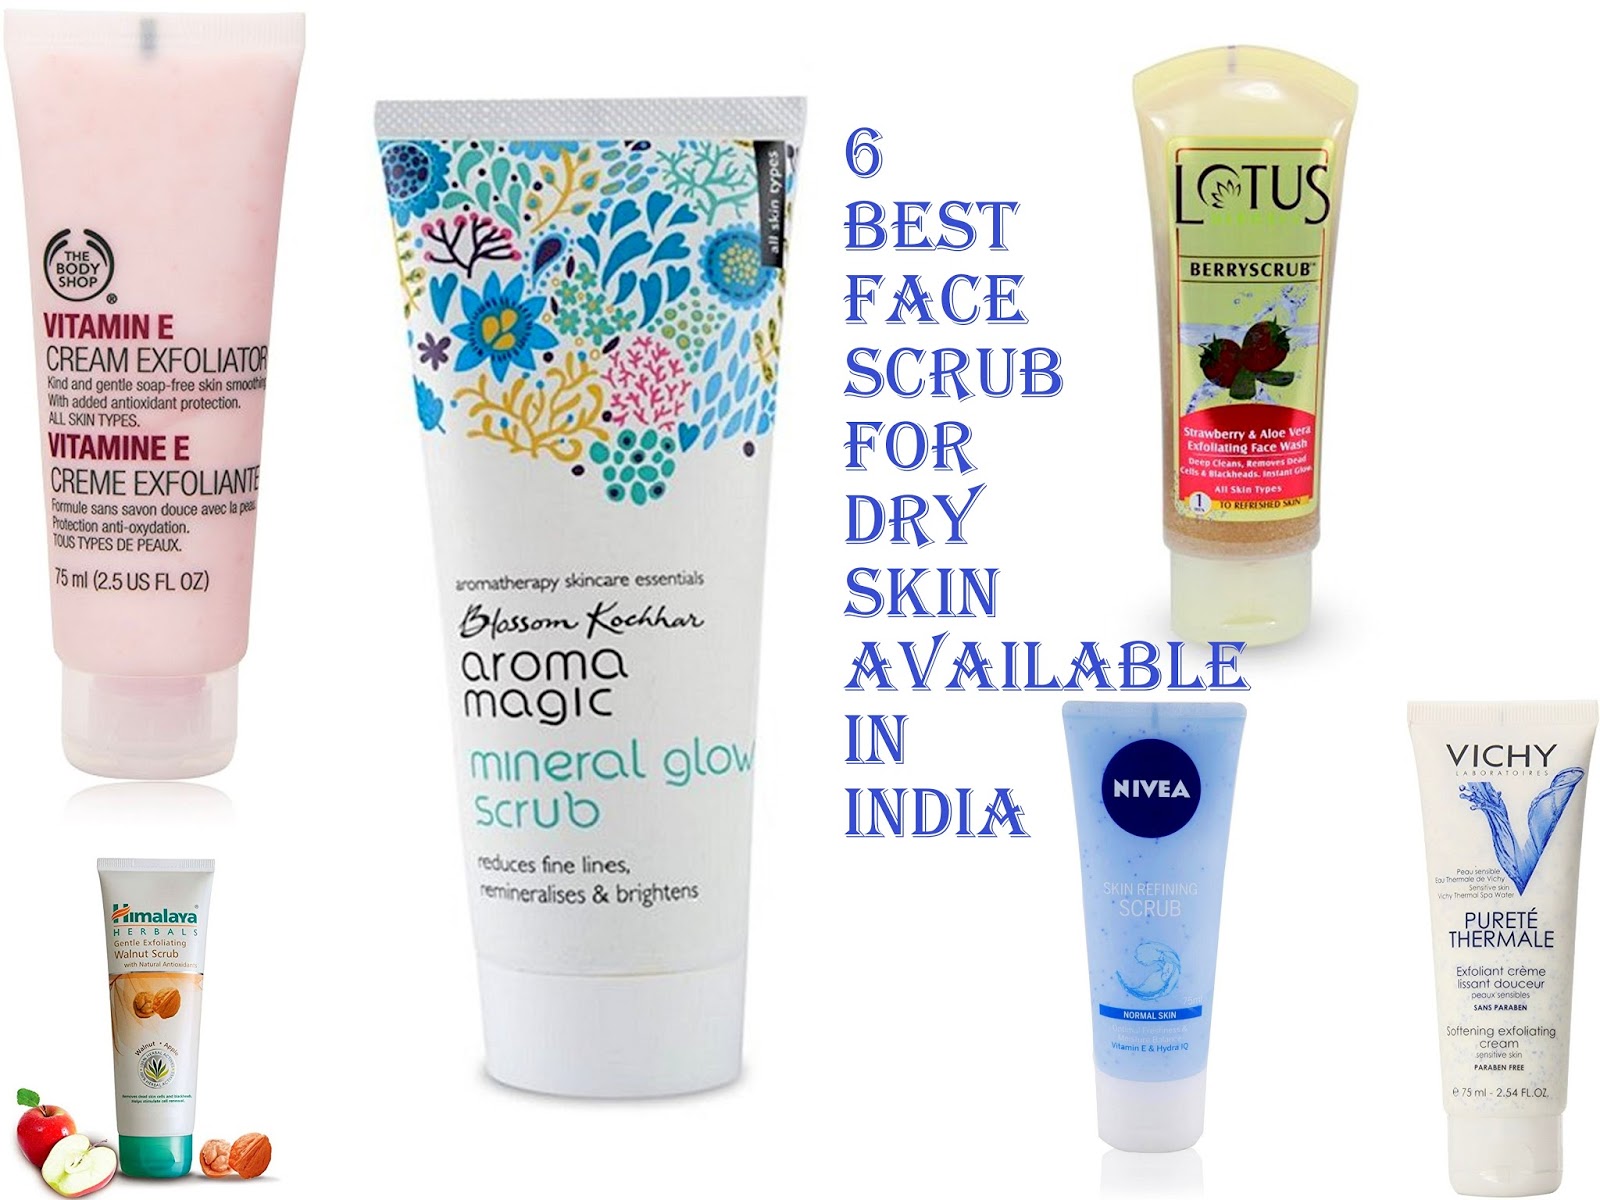 6 Best Face Scrub for Dry Skin Available in India